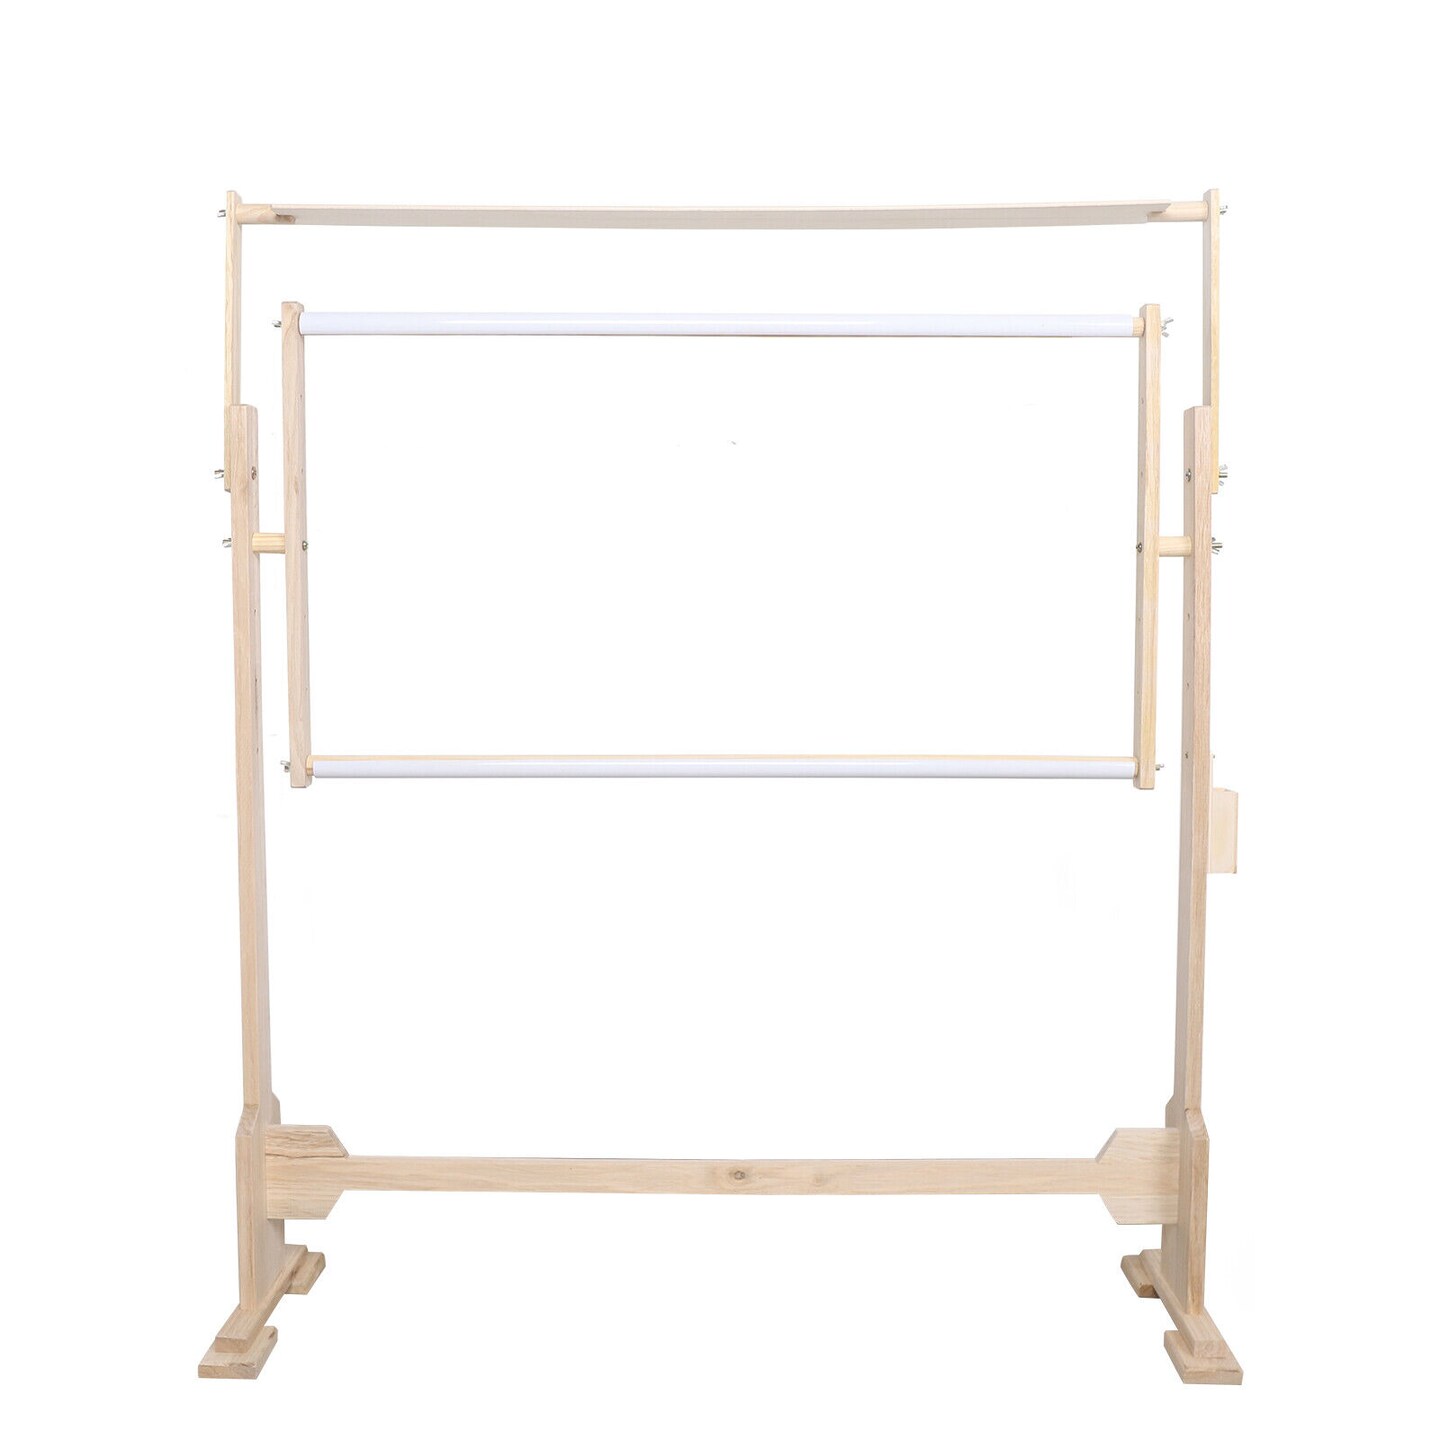 Kitcheniva Adjustable Embroidery Stand Wooden Frame